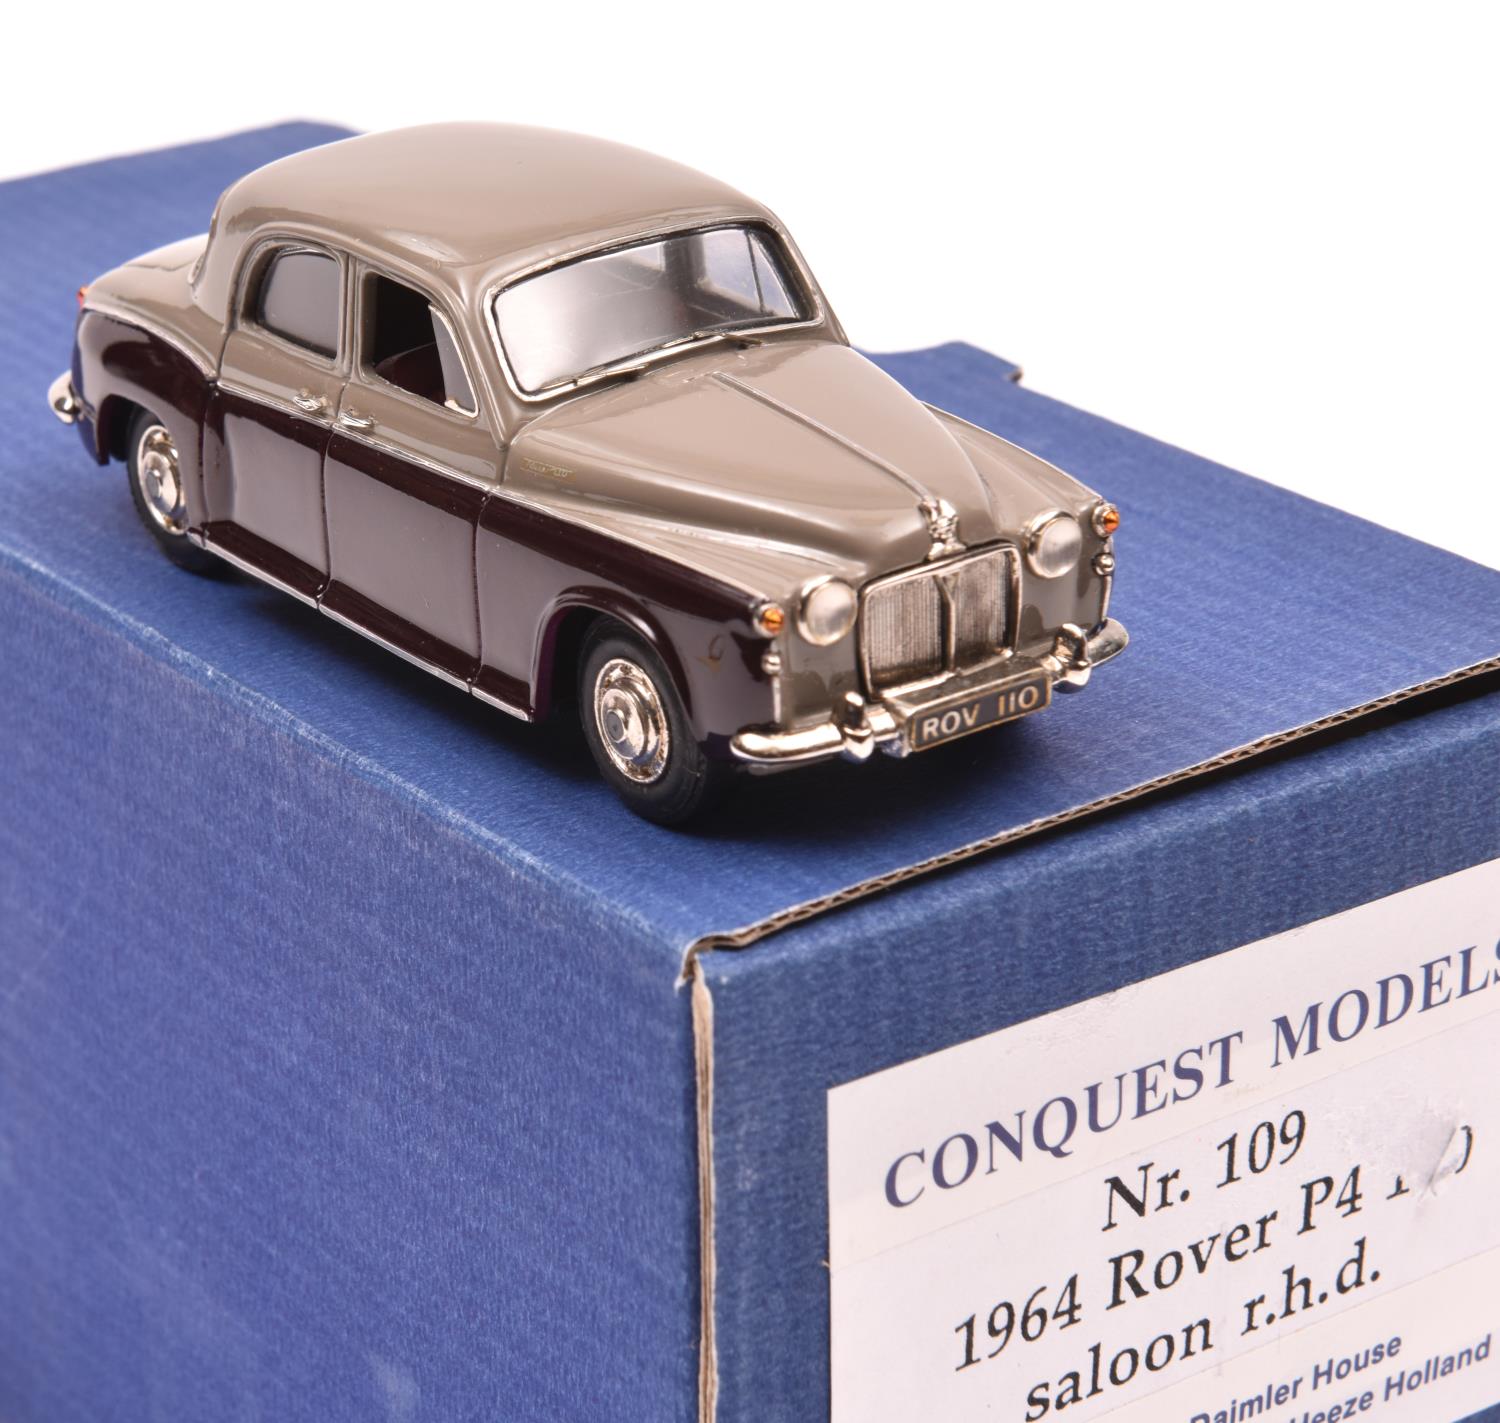 Conquest Models No.109 1964 Rover P.4 110 Saloon, R.H.D. An example in Stone Grey and Burgundy